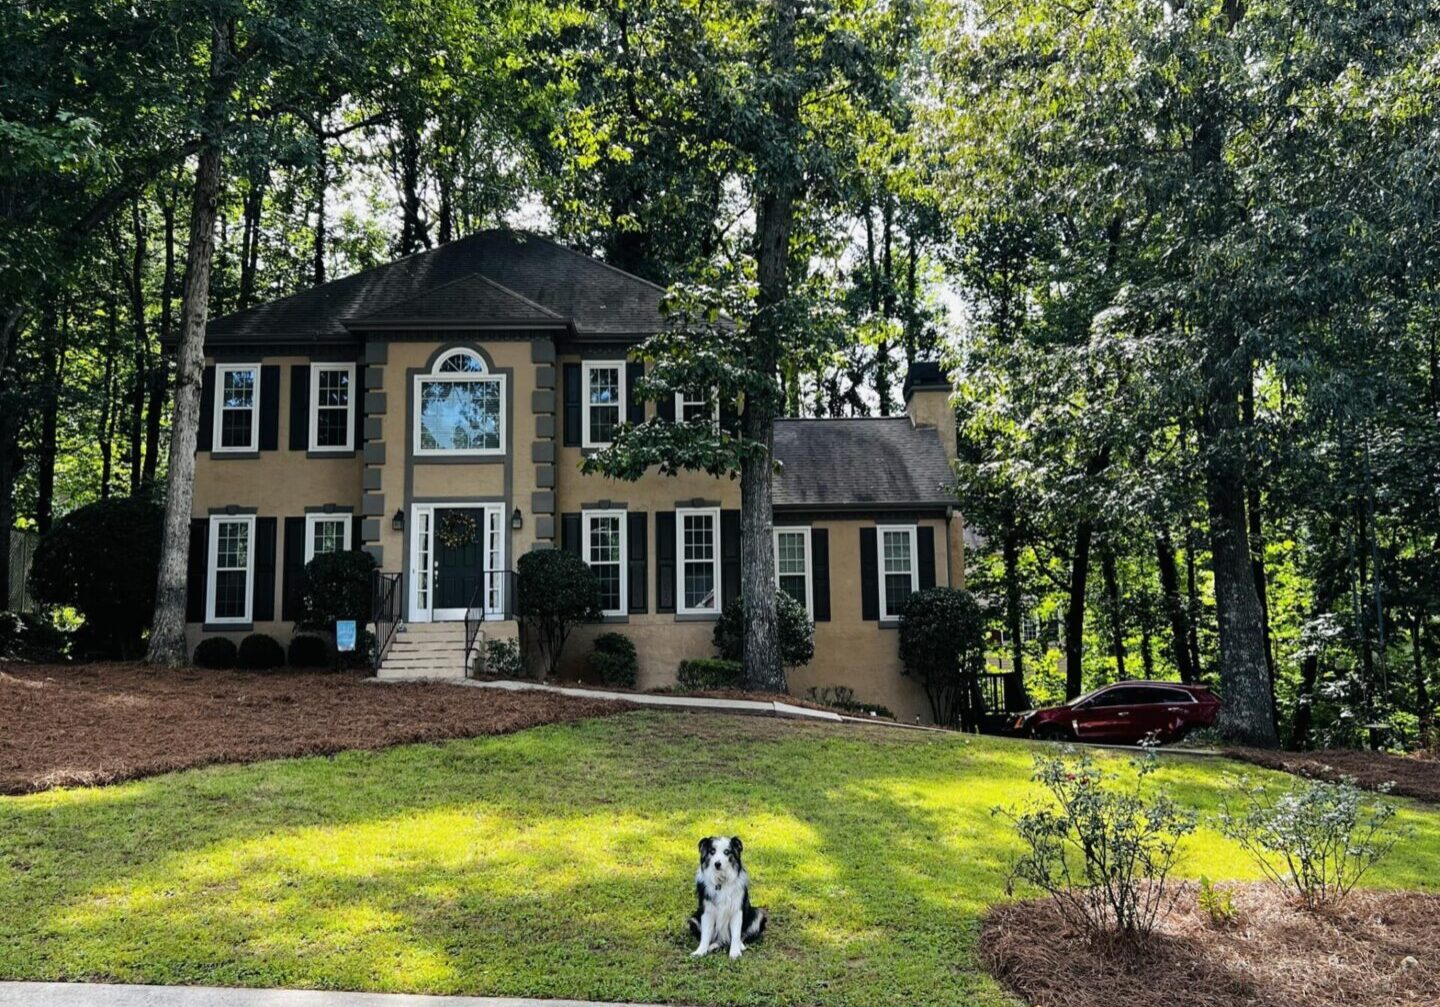 A dog sitting in front of a house